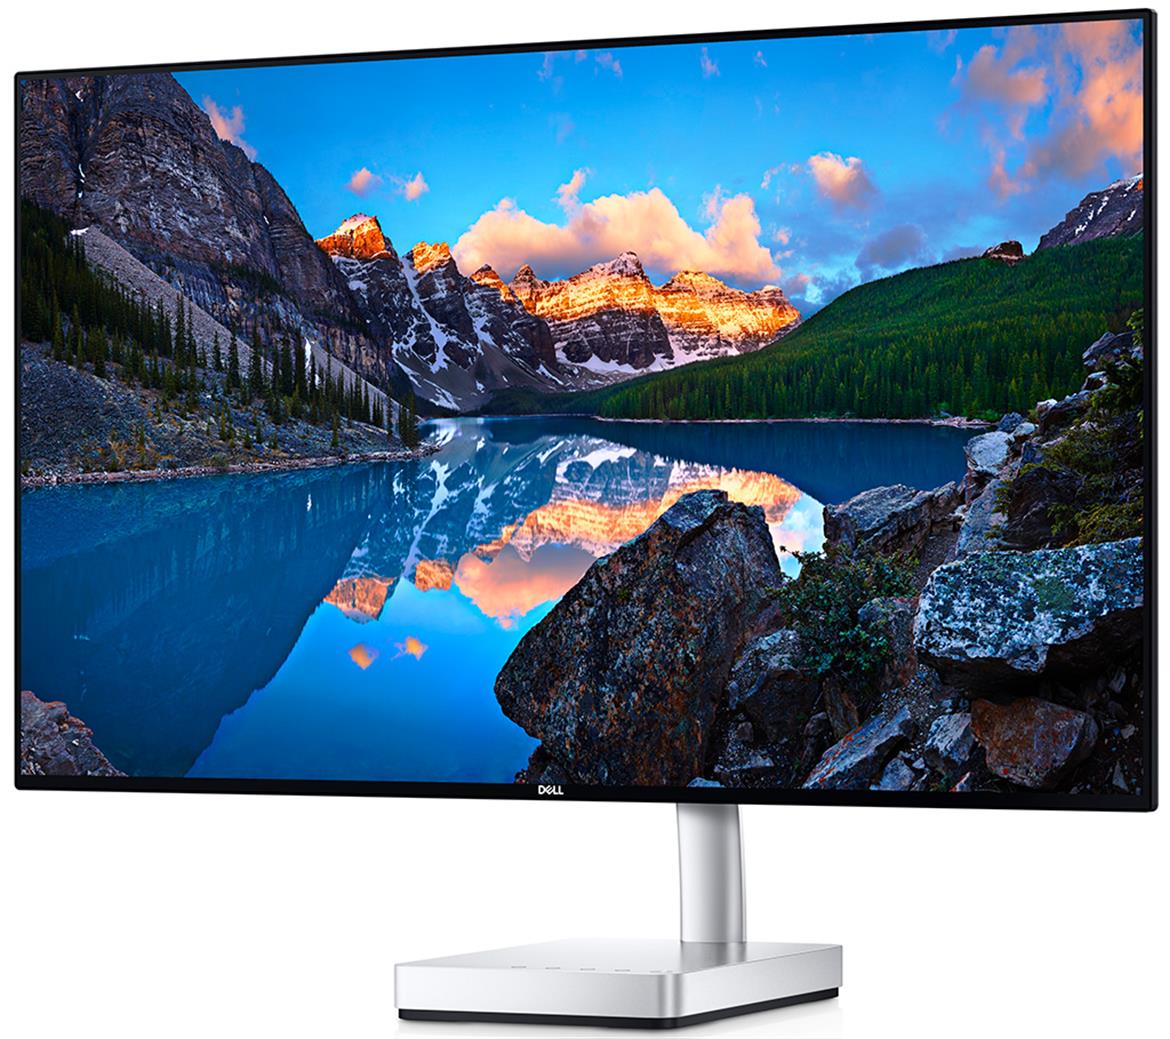 Dell Brings Stunning InfinityEdge Display To XPS 13 2-In-1 Convertible, Intros World's Thinnest 27-Inch Monitor